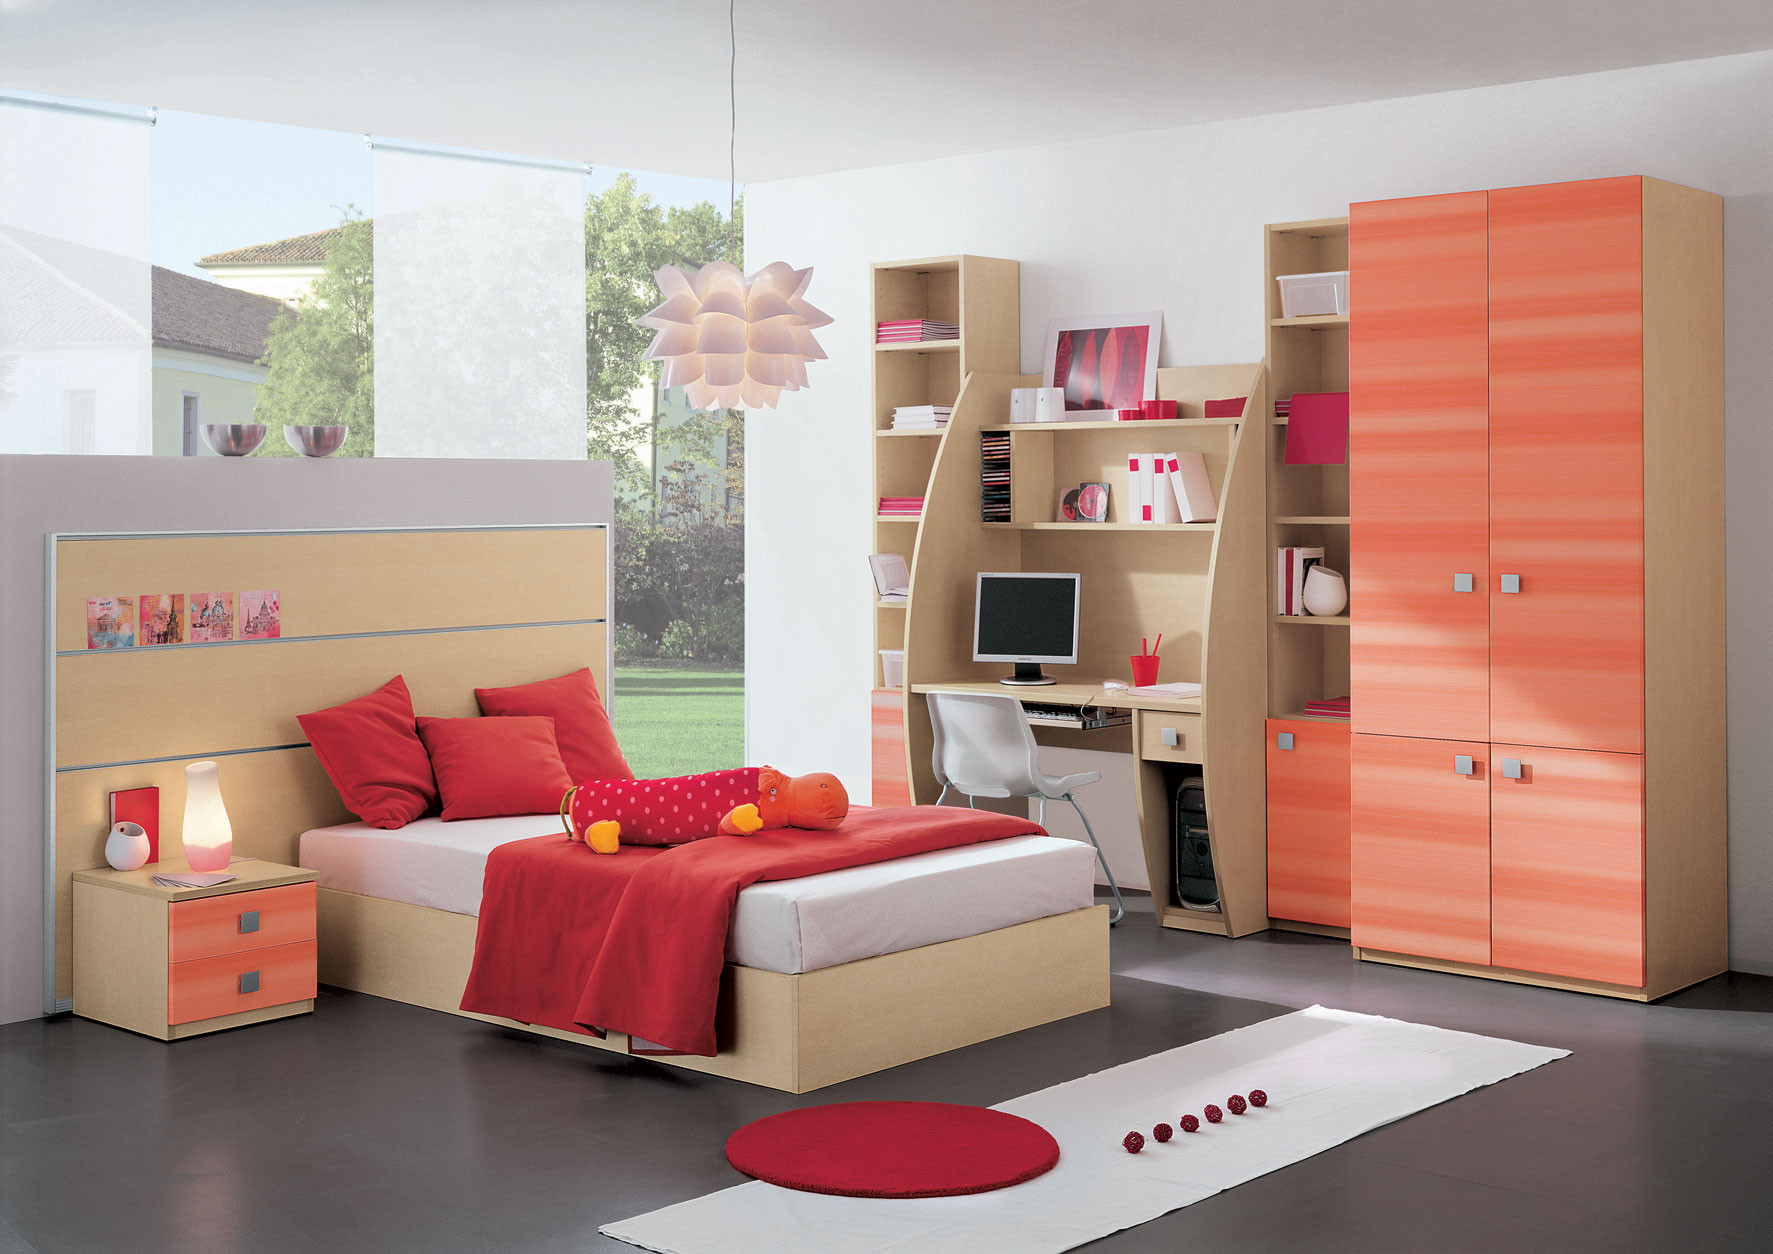 Rooms Design For Kids
 promote Kid’s Rooms From Russian Maker Akossta